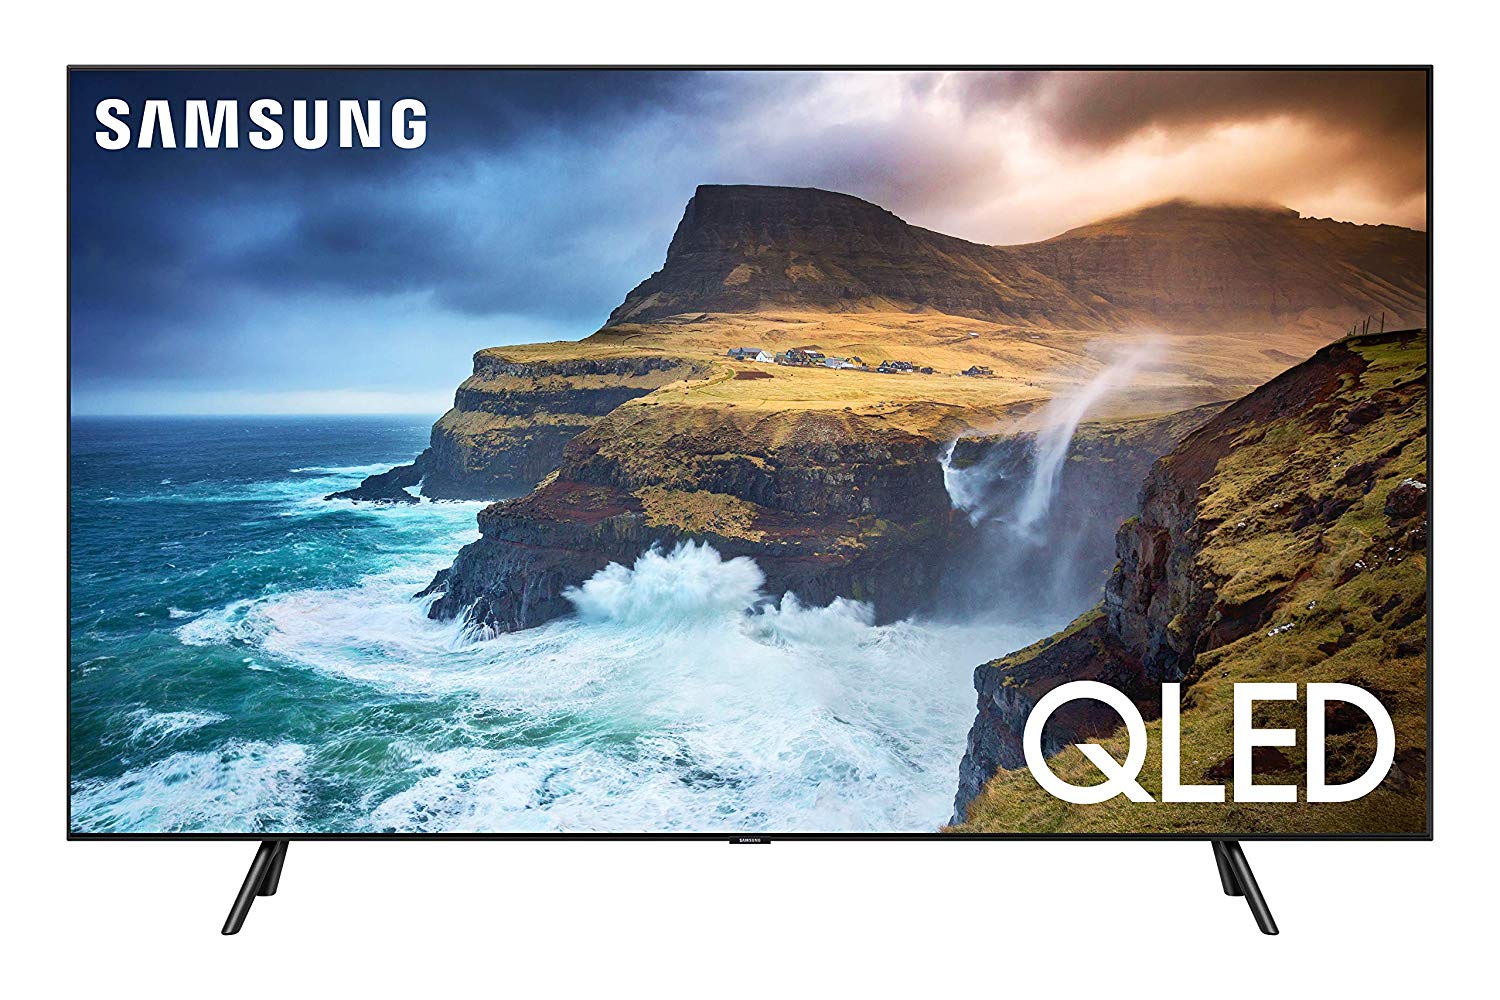 75 Inch Tv Stand with Fireplace Lovely Samsung Qn65q70rafxza Flat 65 Inch Qled 4k Q70 Series Ultra Hd Smart Tv with Hdr and Alexa Patibility 2019 Model